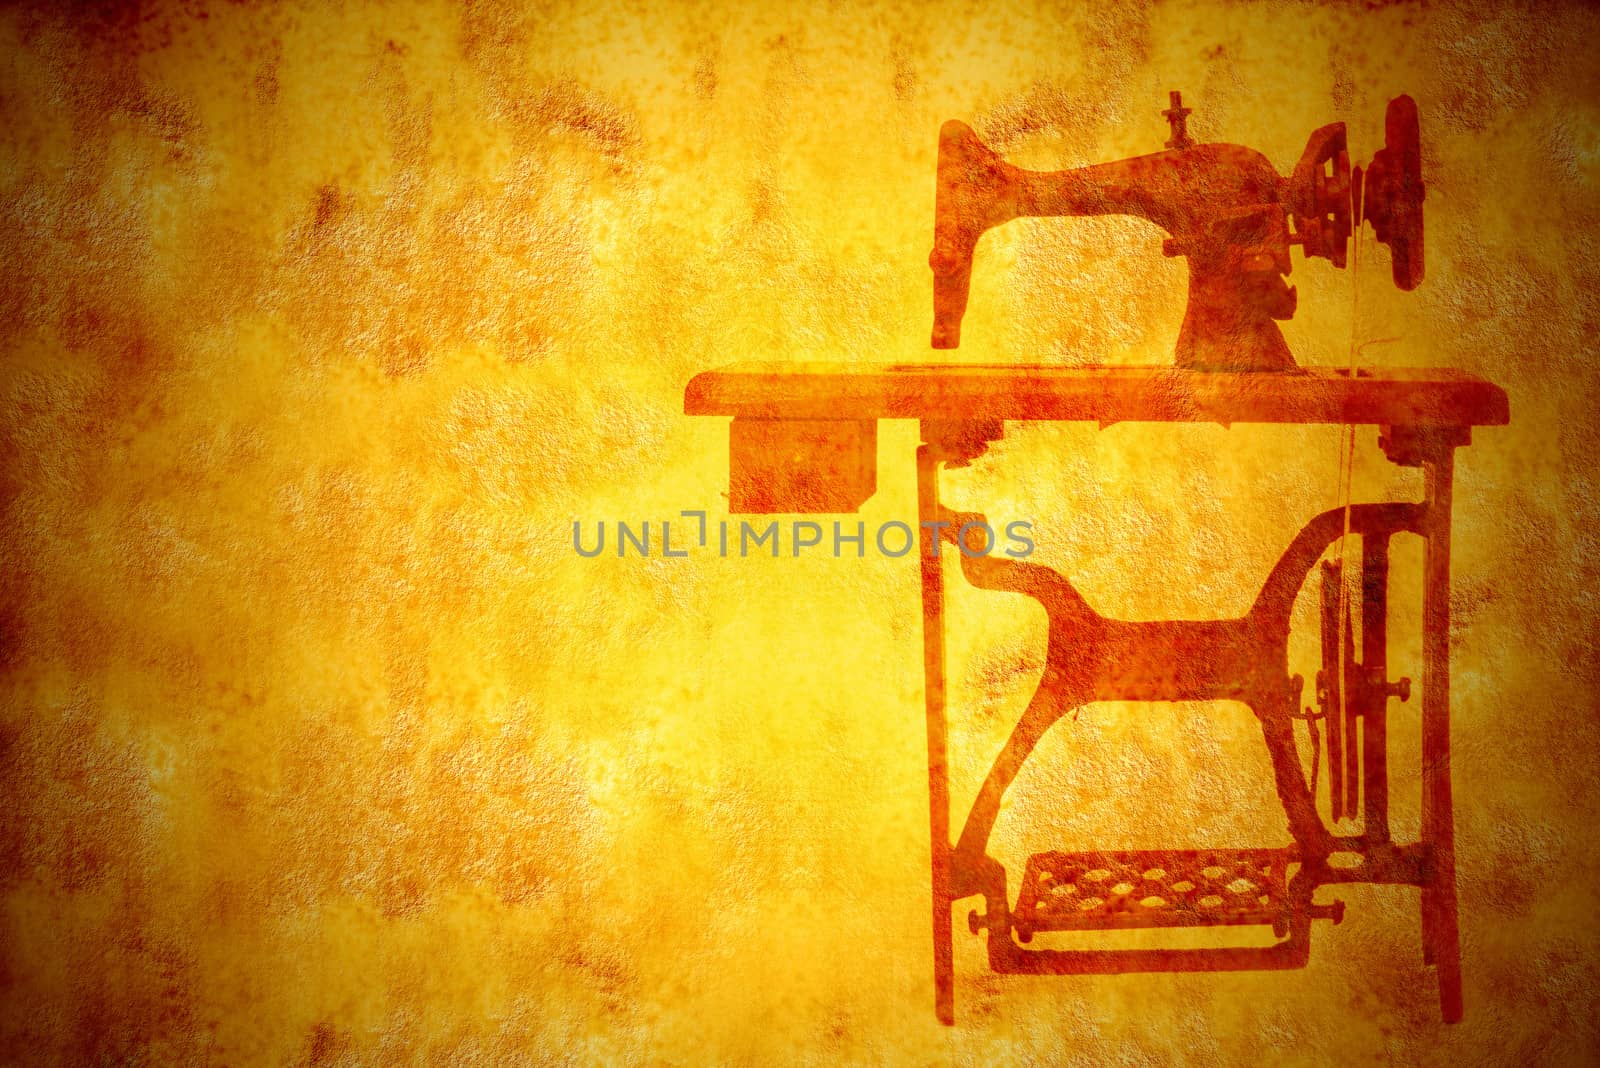 Old sewing machine, vintage background by Carche